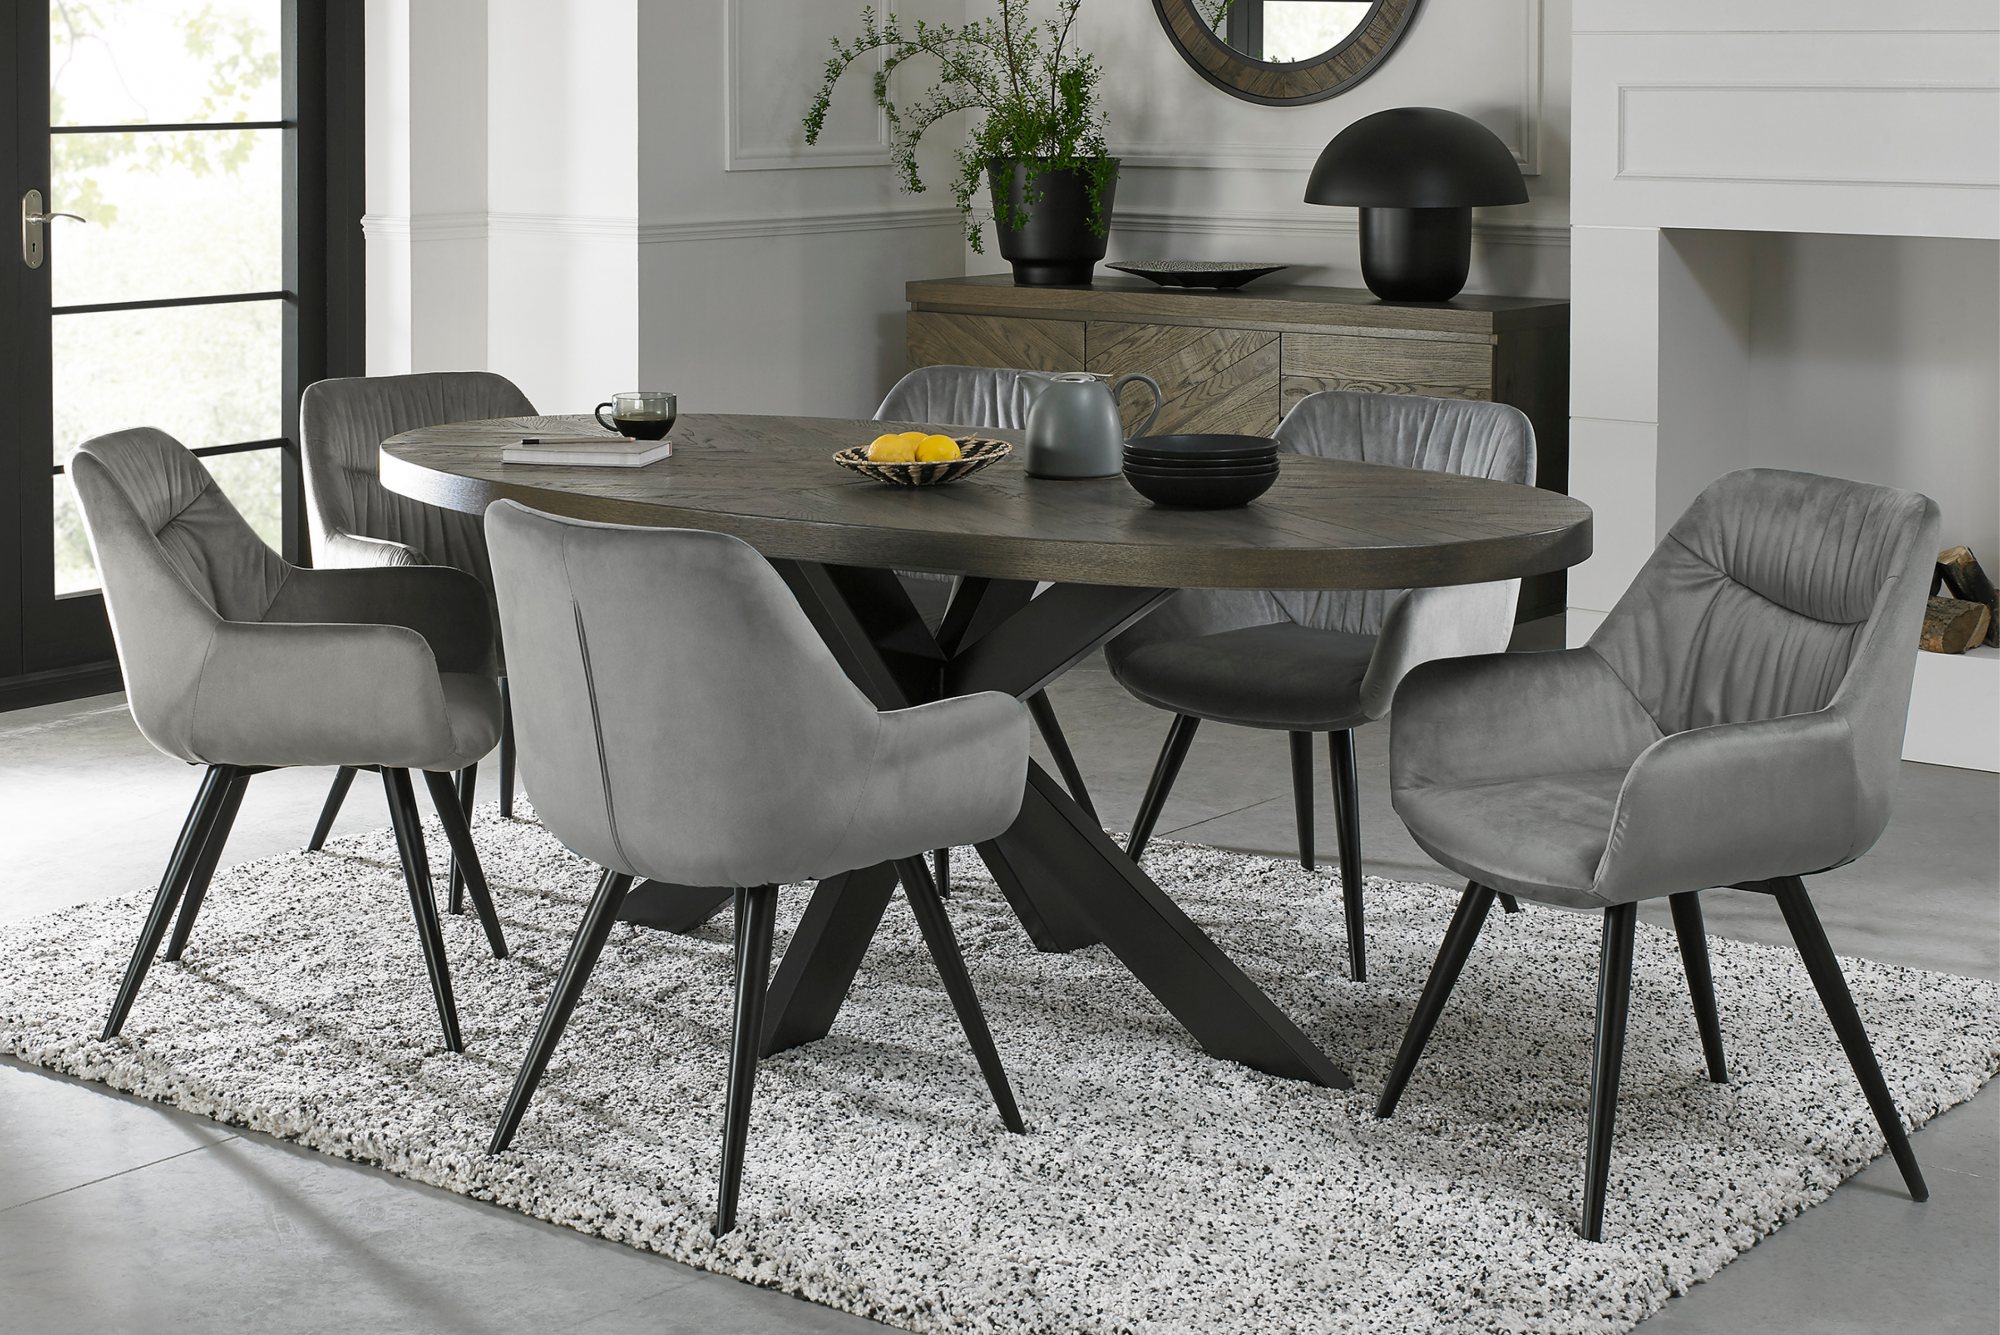 Home Origins Bosco fumed oak 6 seater dining table with 6 Dali chairs- grey velvet fabric